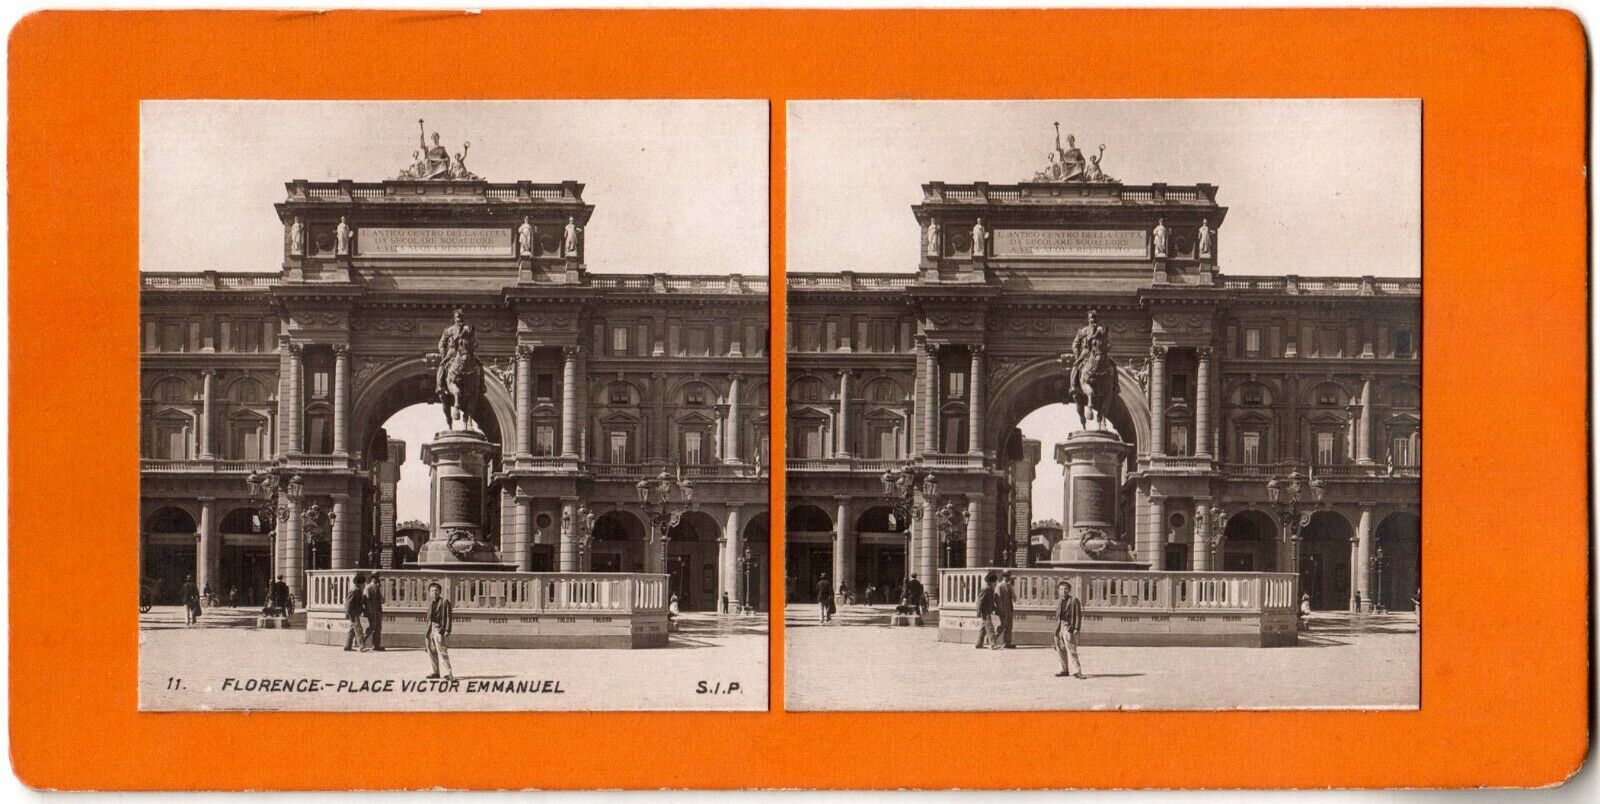 Italy.Italia.Florence.Firenze.Place Victor Emmanuel.Animated.Photo Stereo.S.I.P.